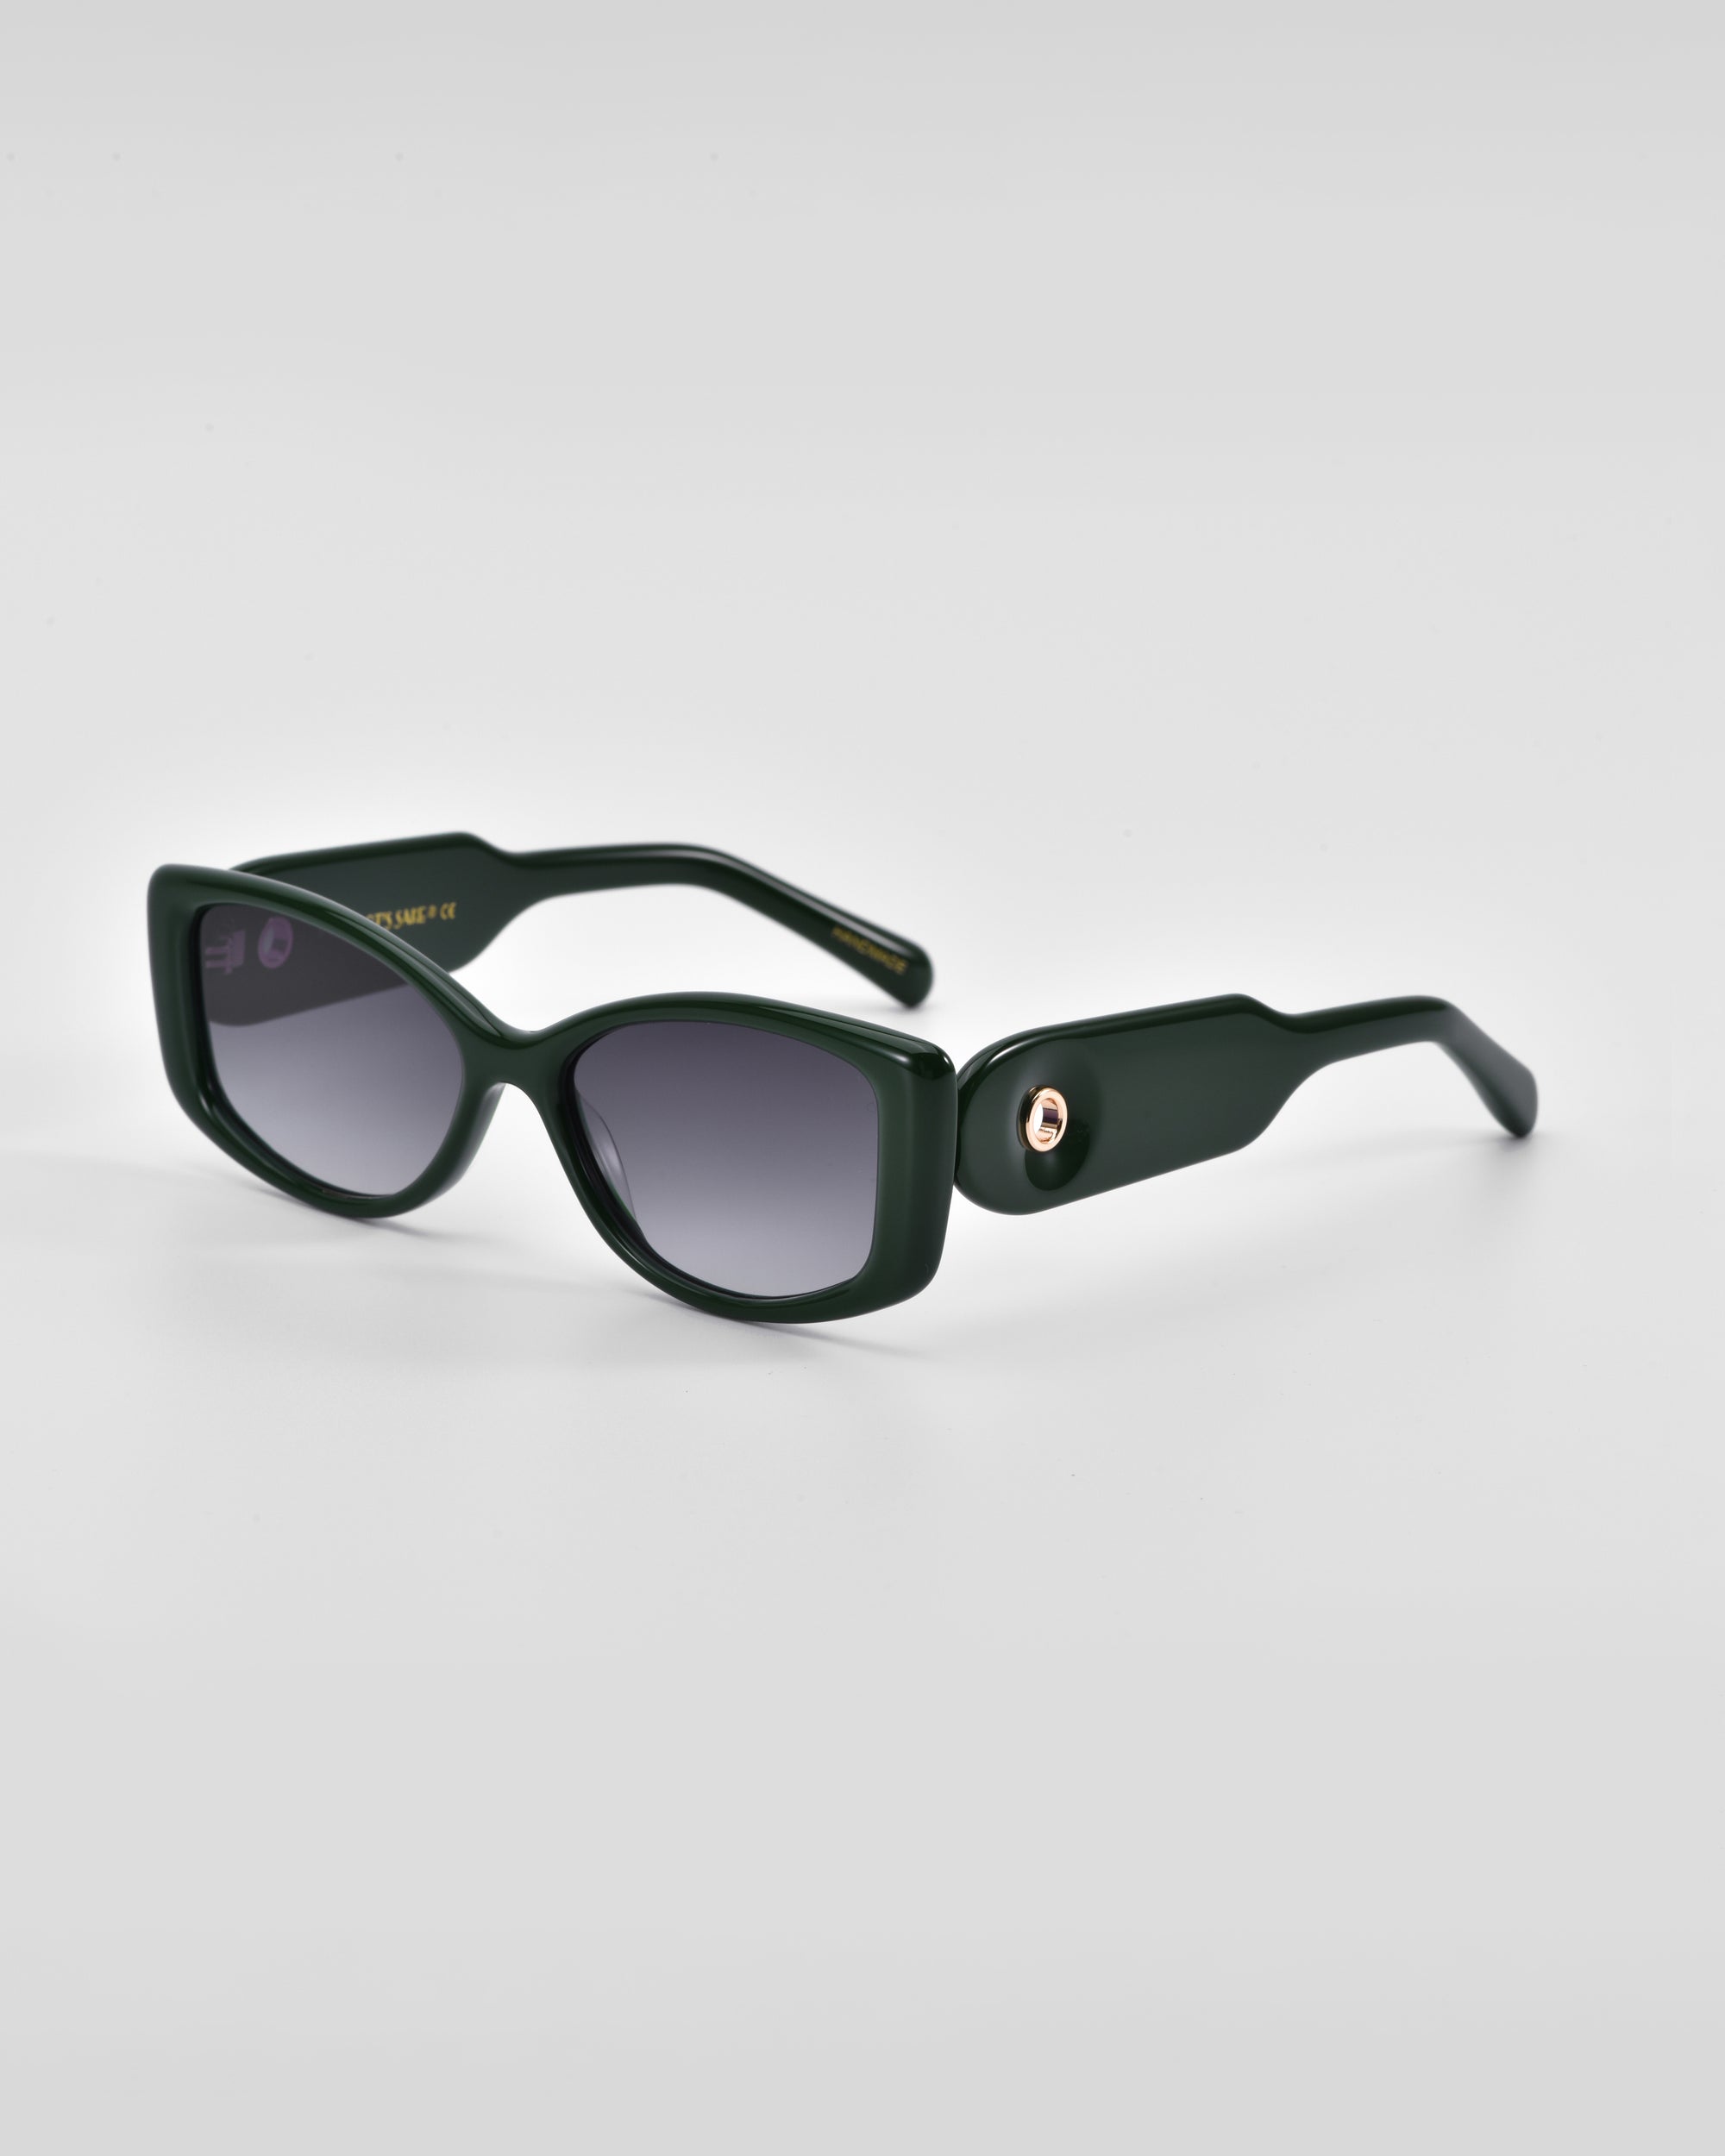 A pair of stylish, dark green For Art&#39;s Sake® Mene sunglasses with rectangular frames and dark tinted lenses. The left temple arm features a luxurious 18 karat gold accent near the hinge on a plain white background.